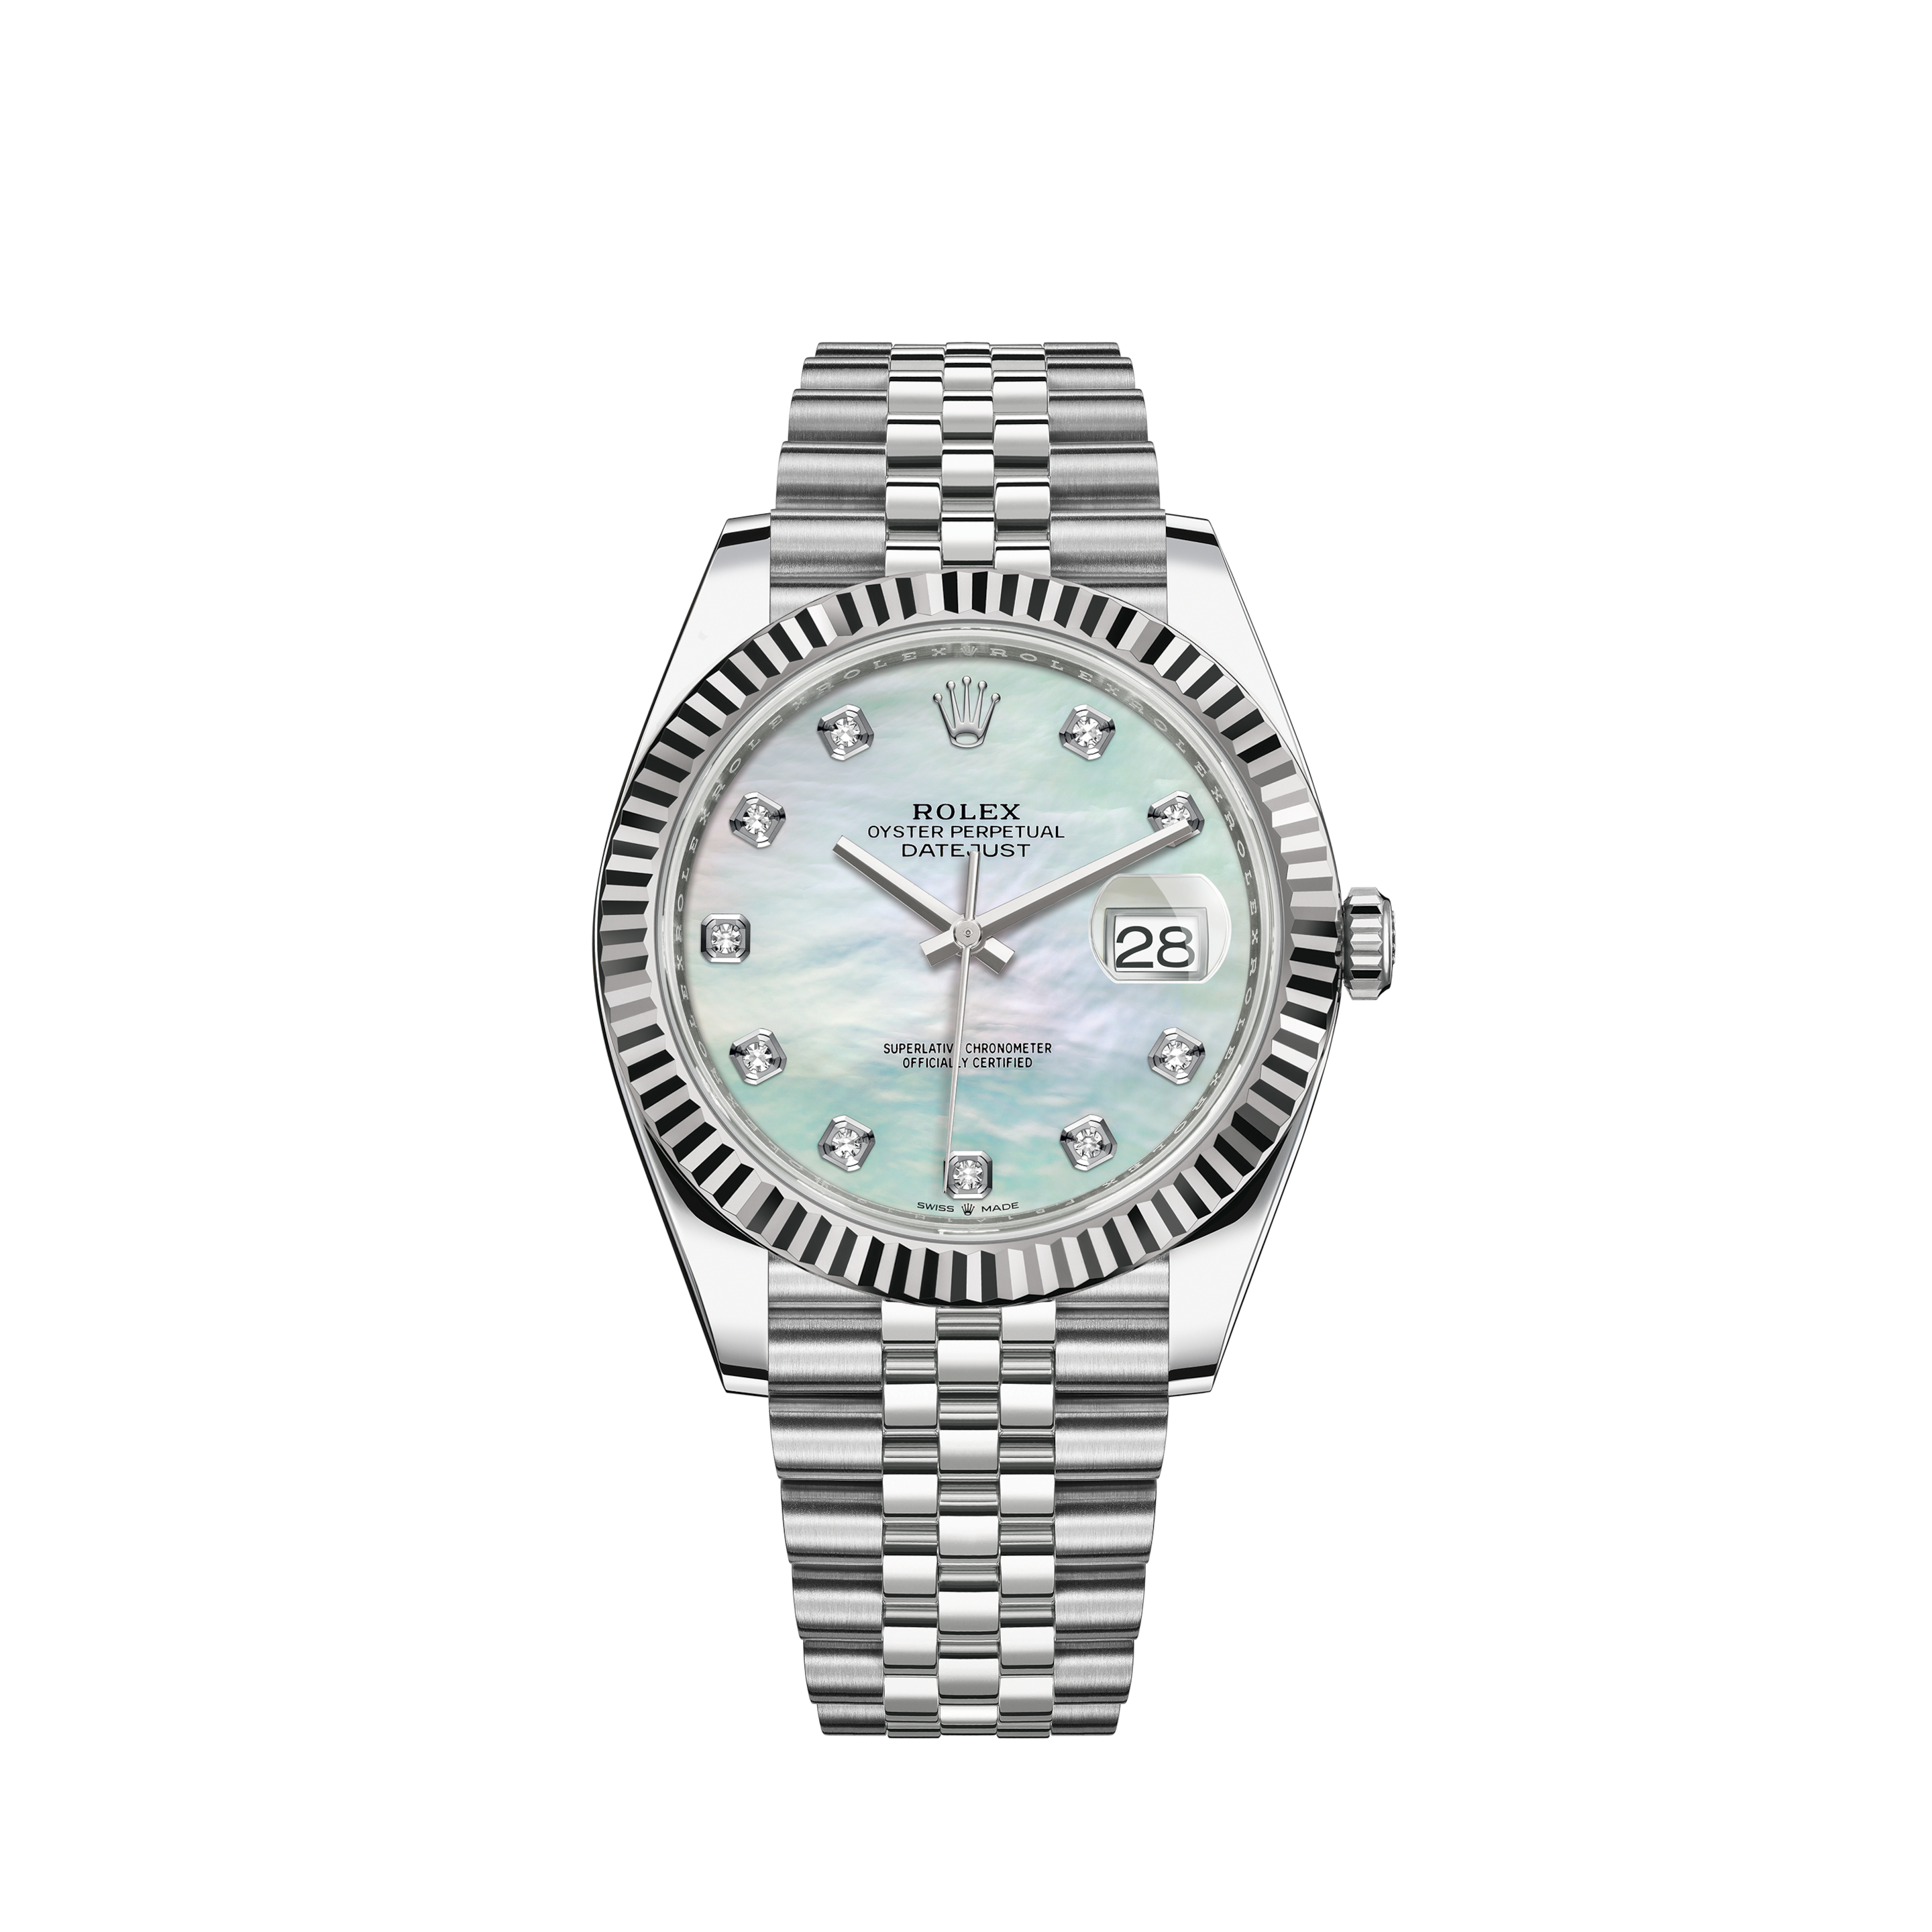 rolex datejust 41 mother of pearl dial